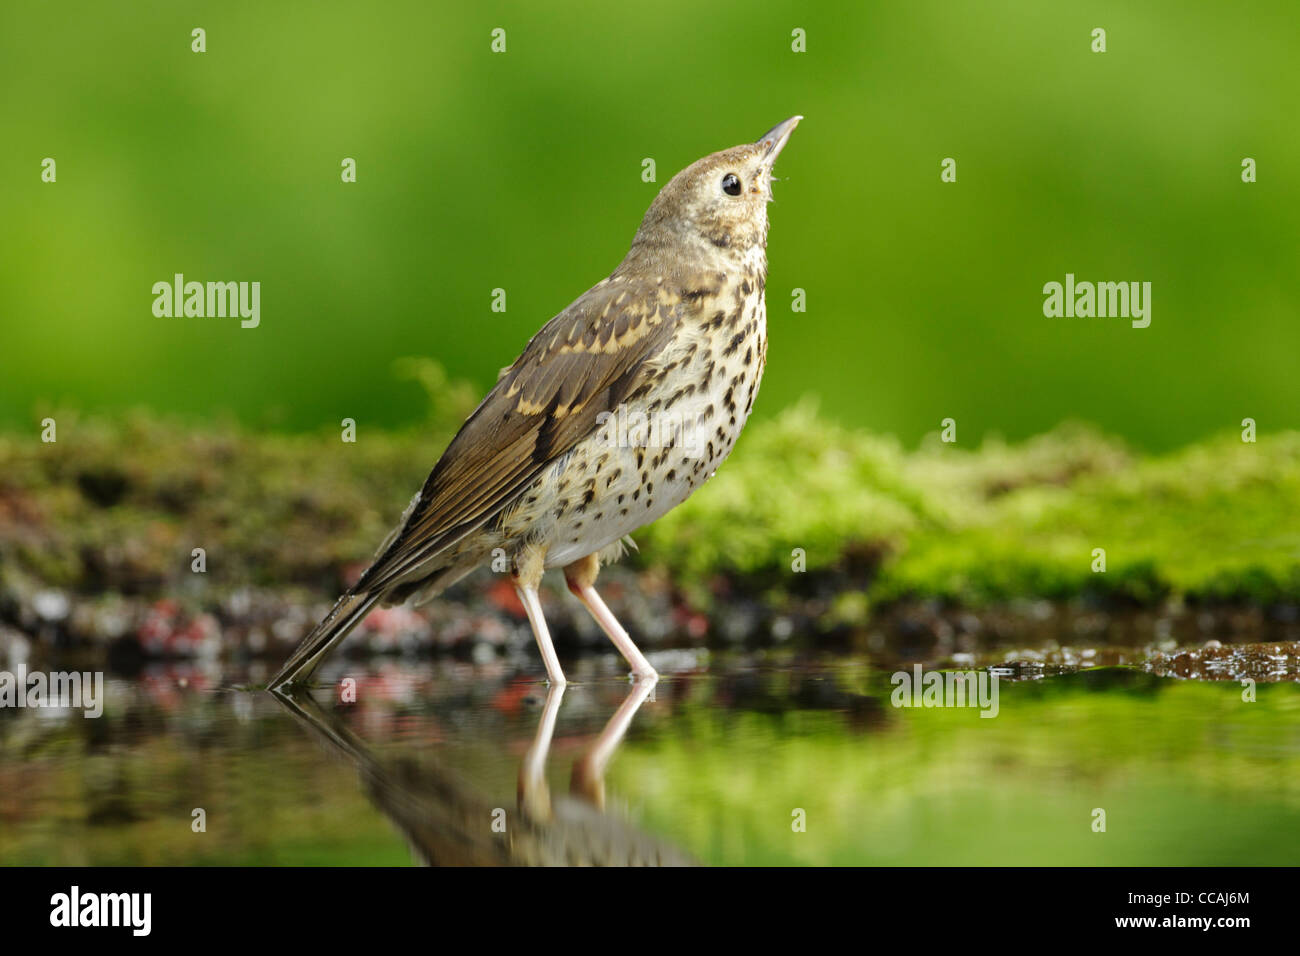 Song thrush (Turdus philomelos) looking upwards wihilst standing in water at the edge of a woodland pond Stock Photo